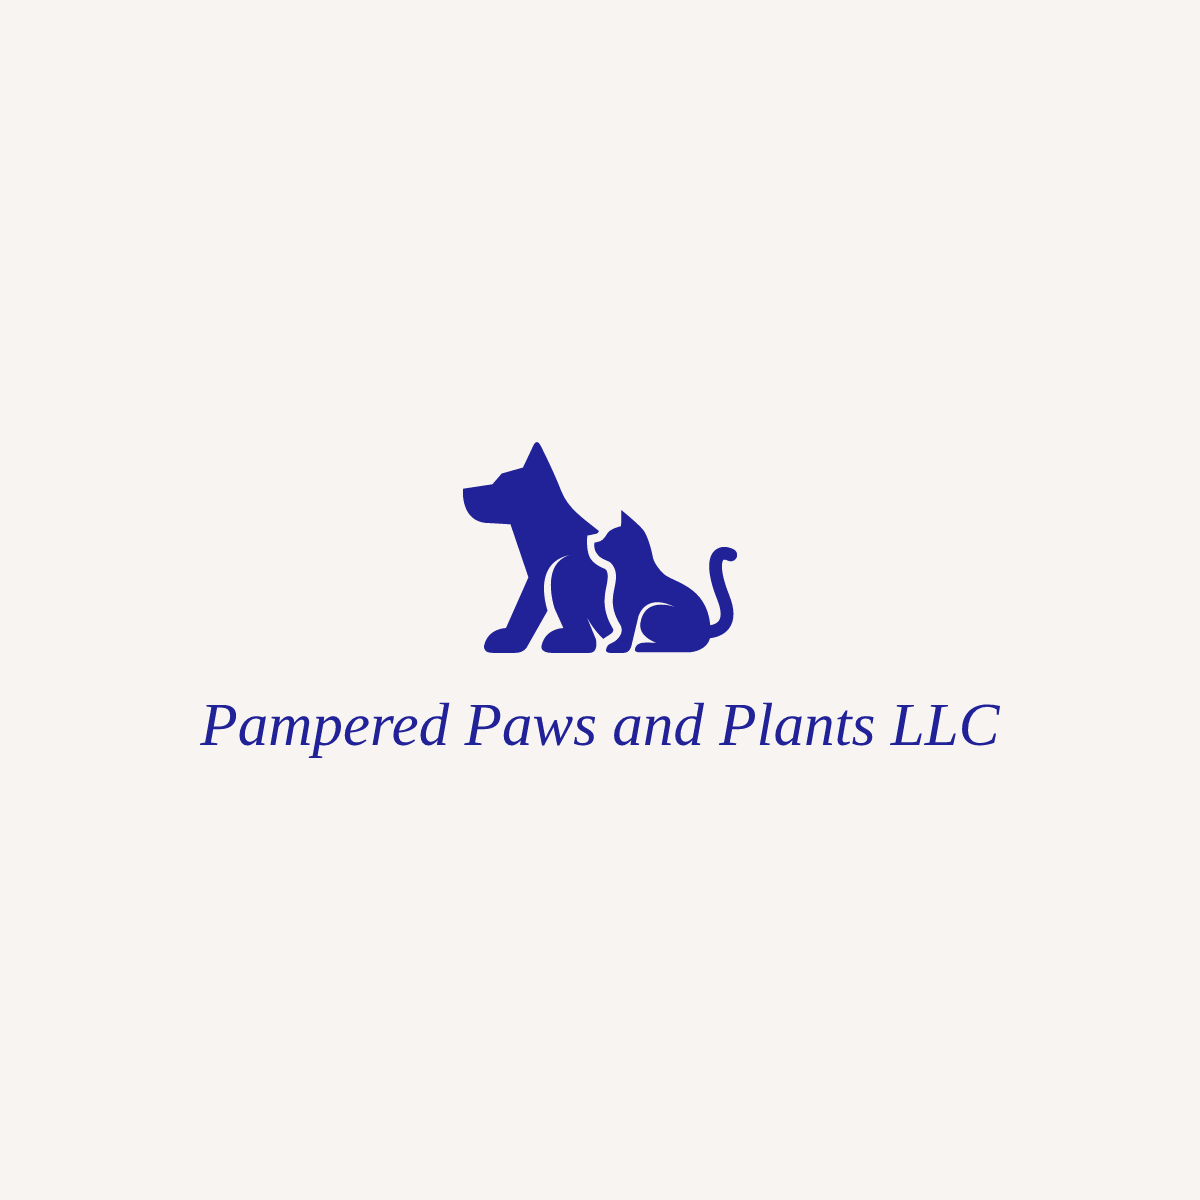 Pampered Paws and Plants, LLC